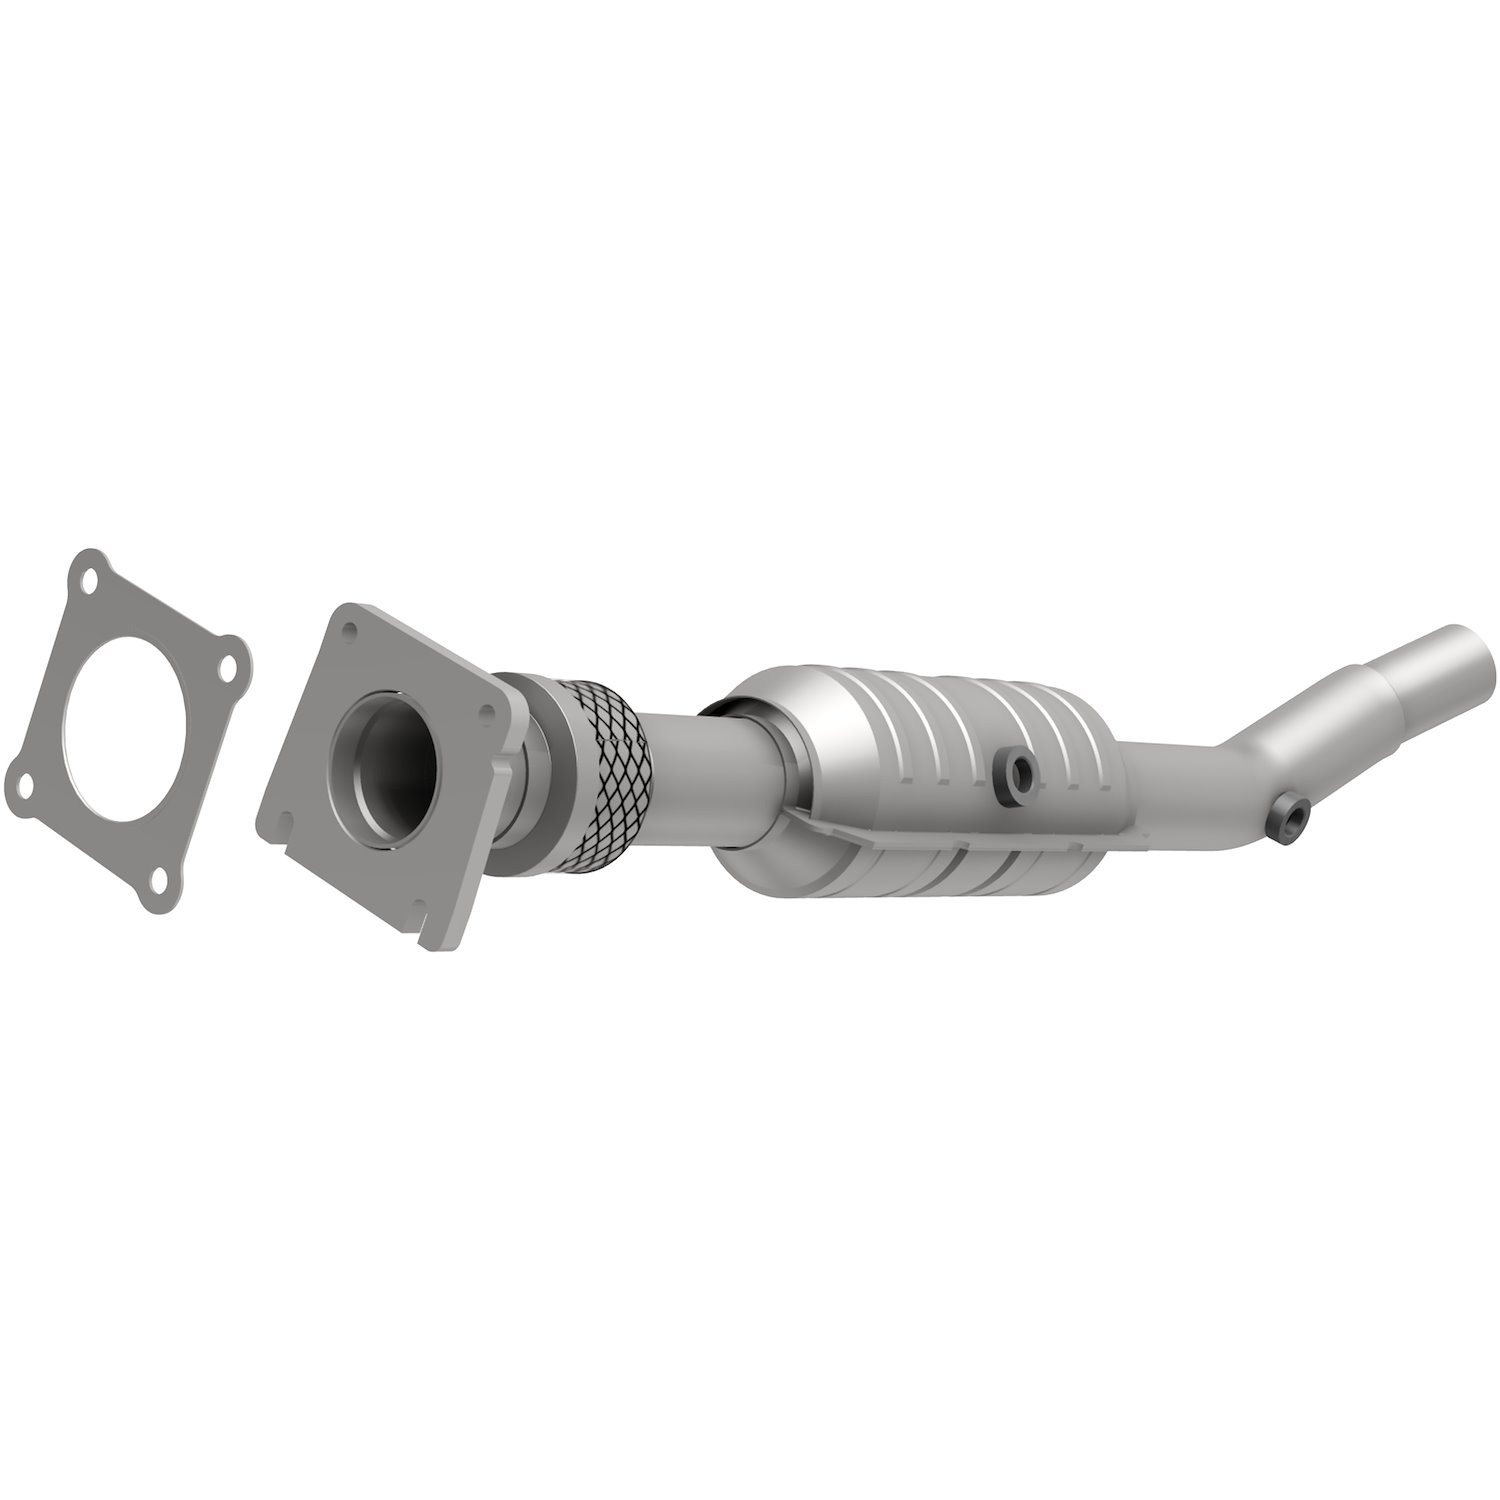 OEM Grade Federal / EPA Compliant Direct-Fit Catalytic Converter 49514